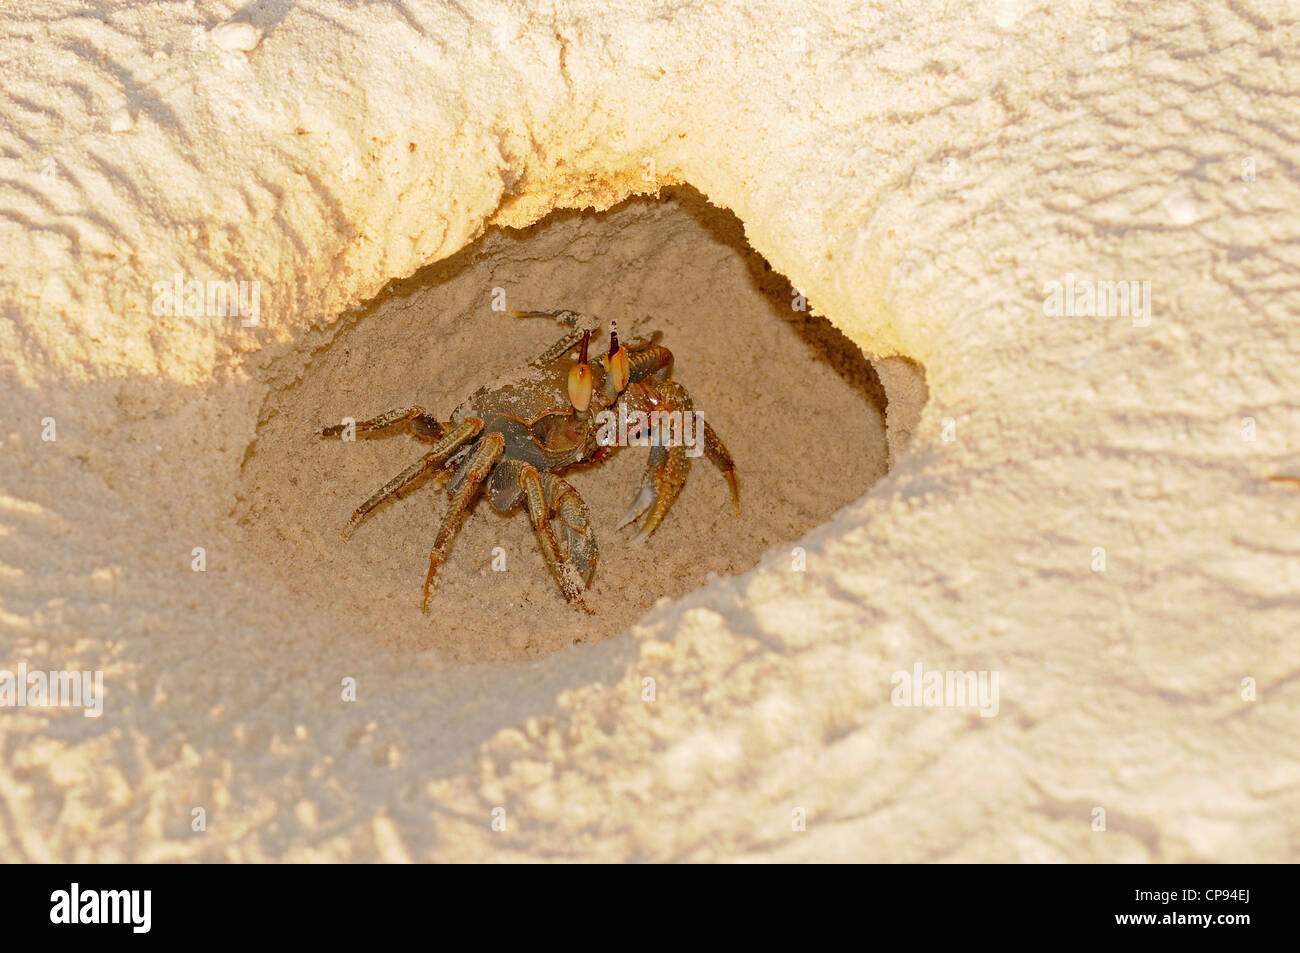 Horned or Horn-eyed Ghost Crab (Ocypode ceratophthalmus) rseting at entrance to burrow, The Maldives Stock Photo